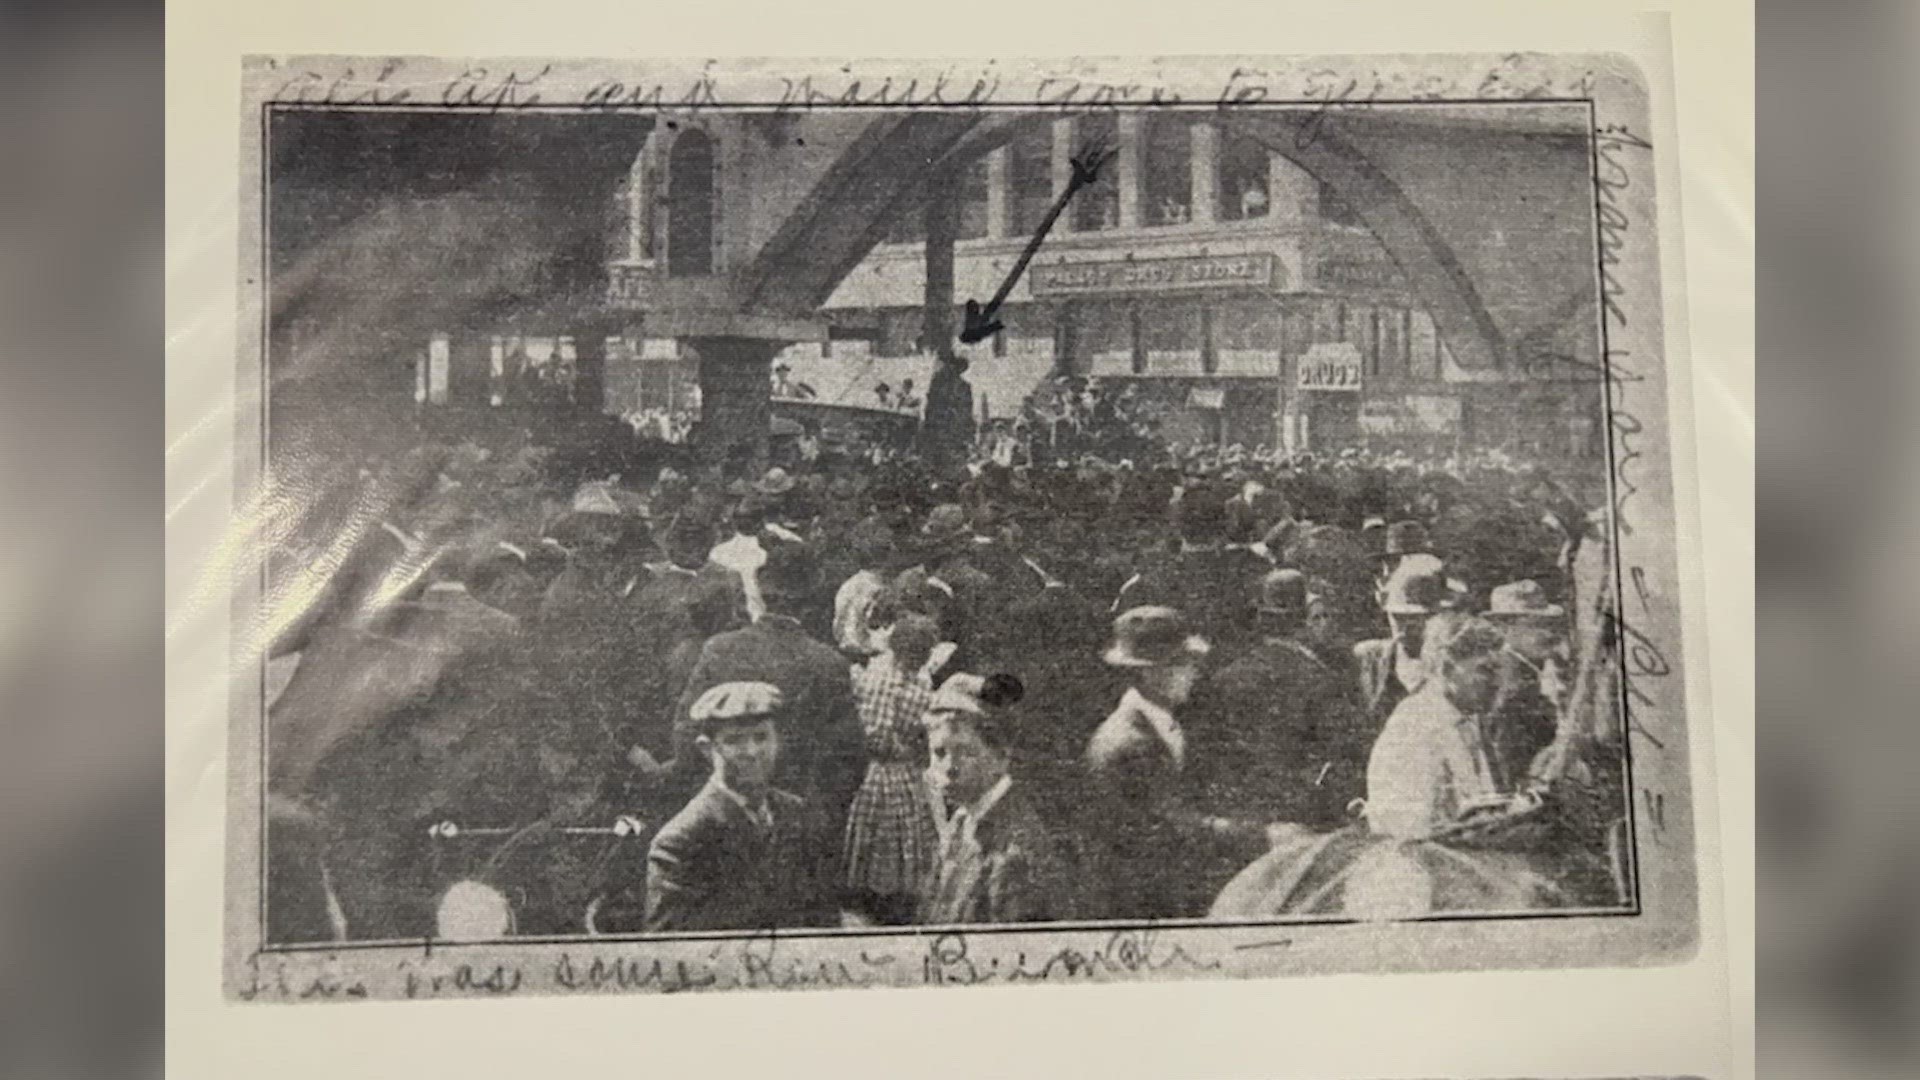 The lynching of Allen Brooks was celebrated by thousands on Main and Akard Street in 1910 and printed on postcards.